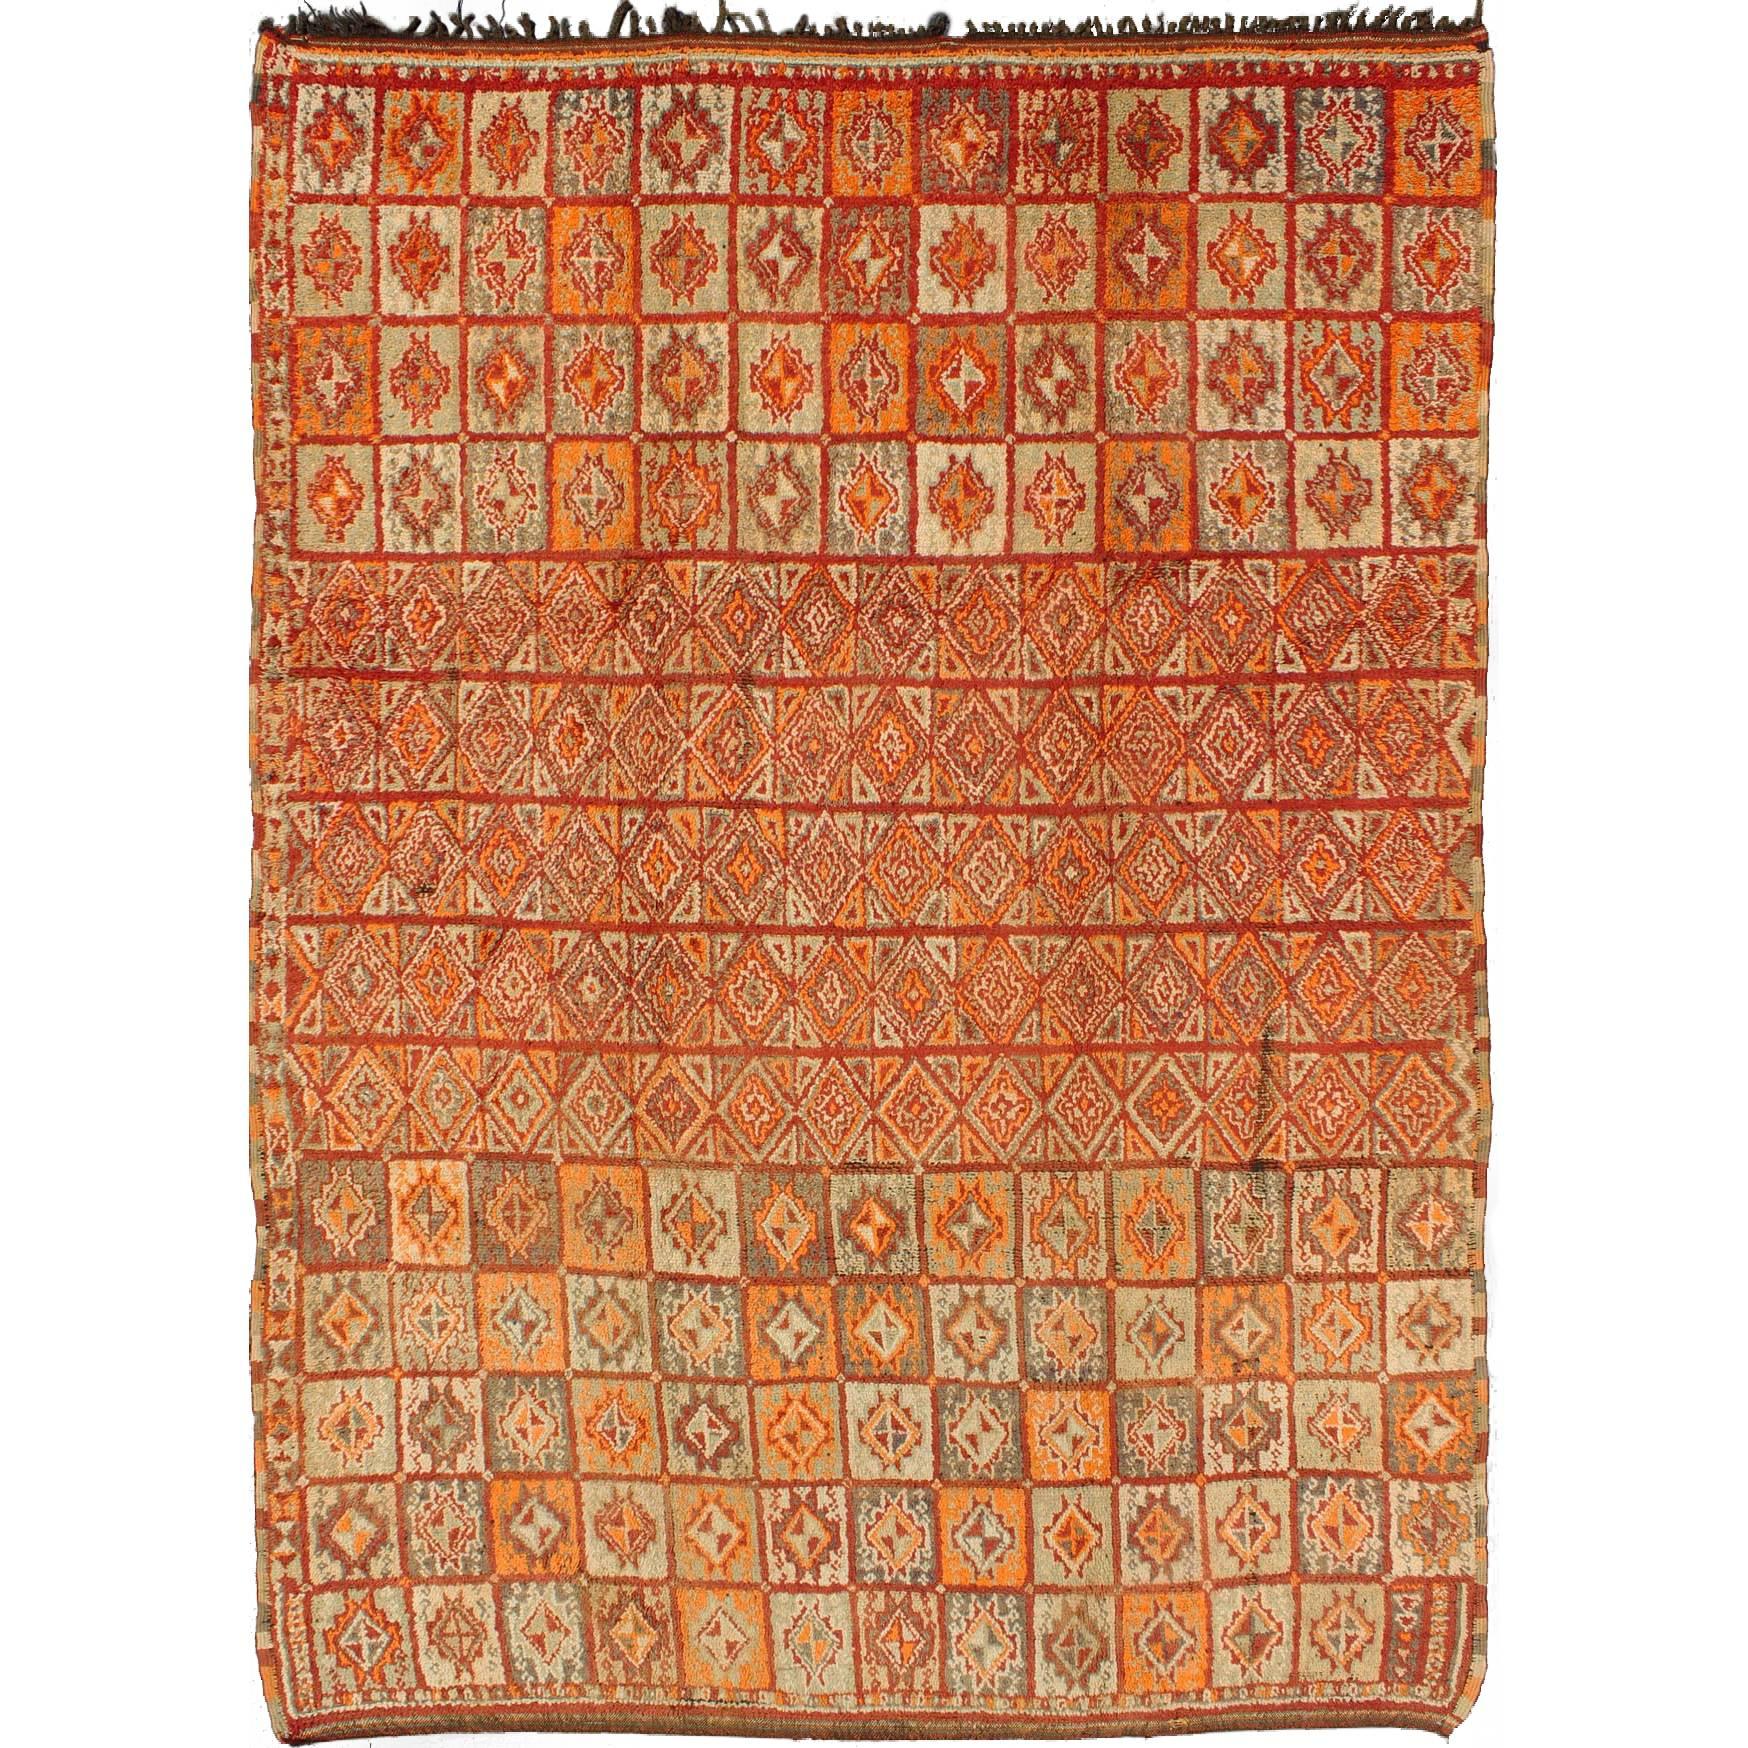 Vintage Moroccan Rug in Autumn Colors, Red, Pumpkin, Orange and Light Green